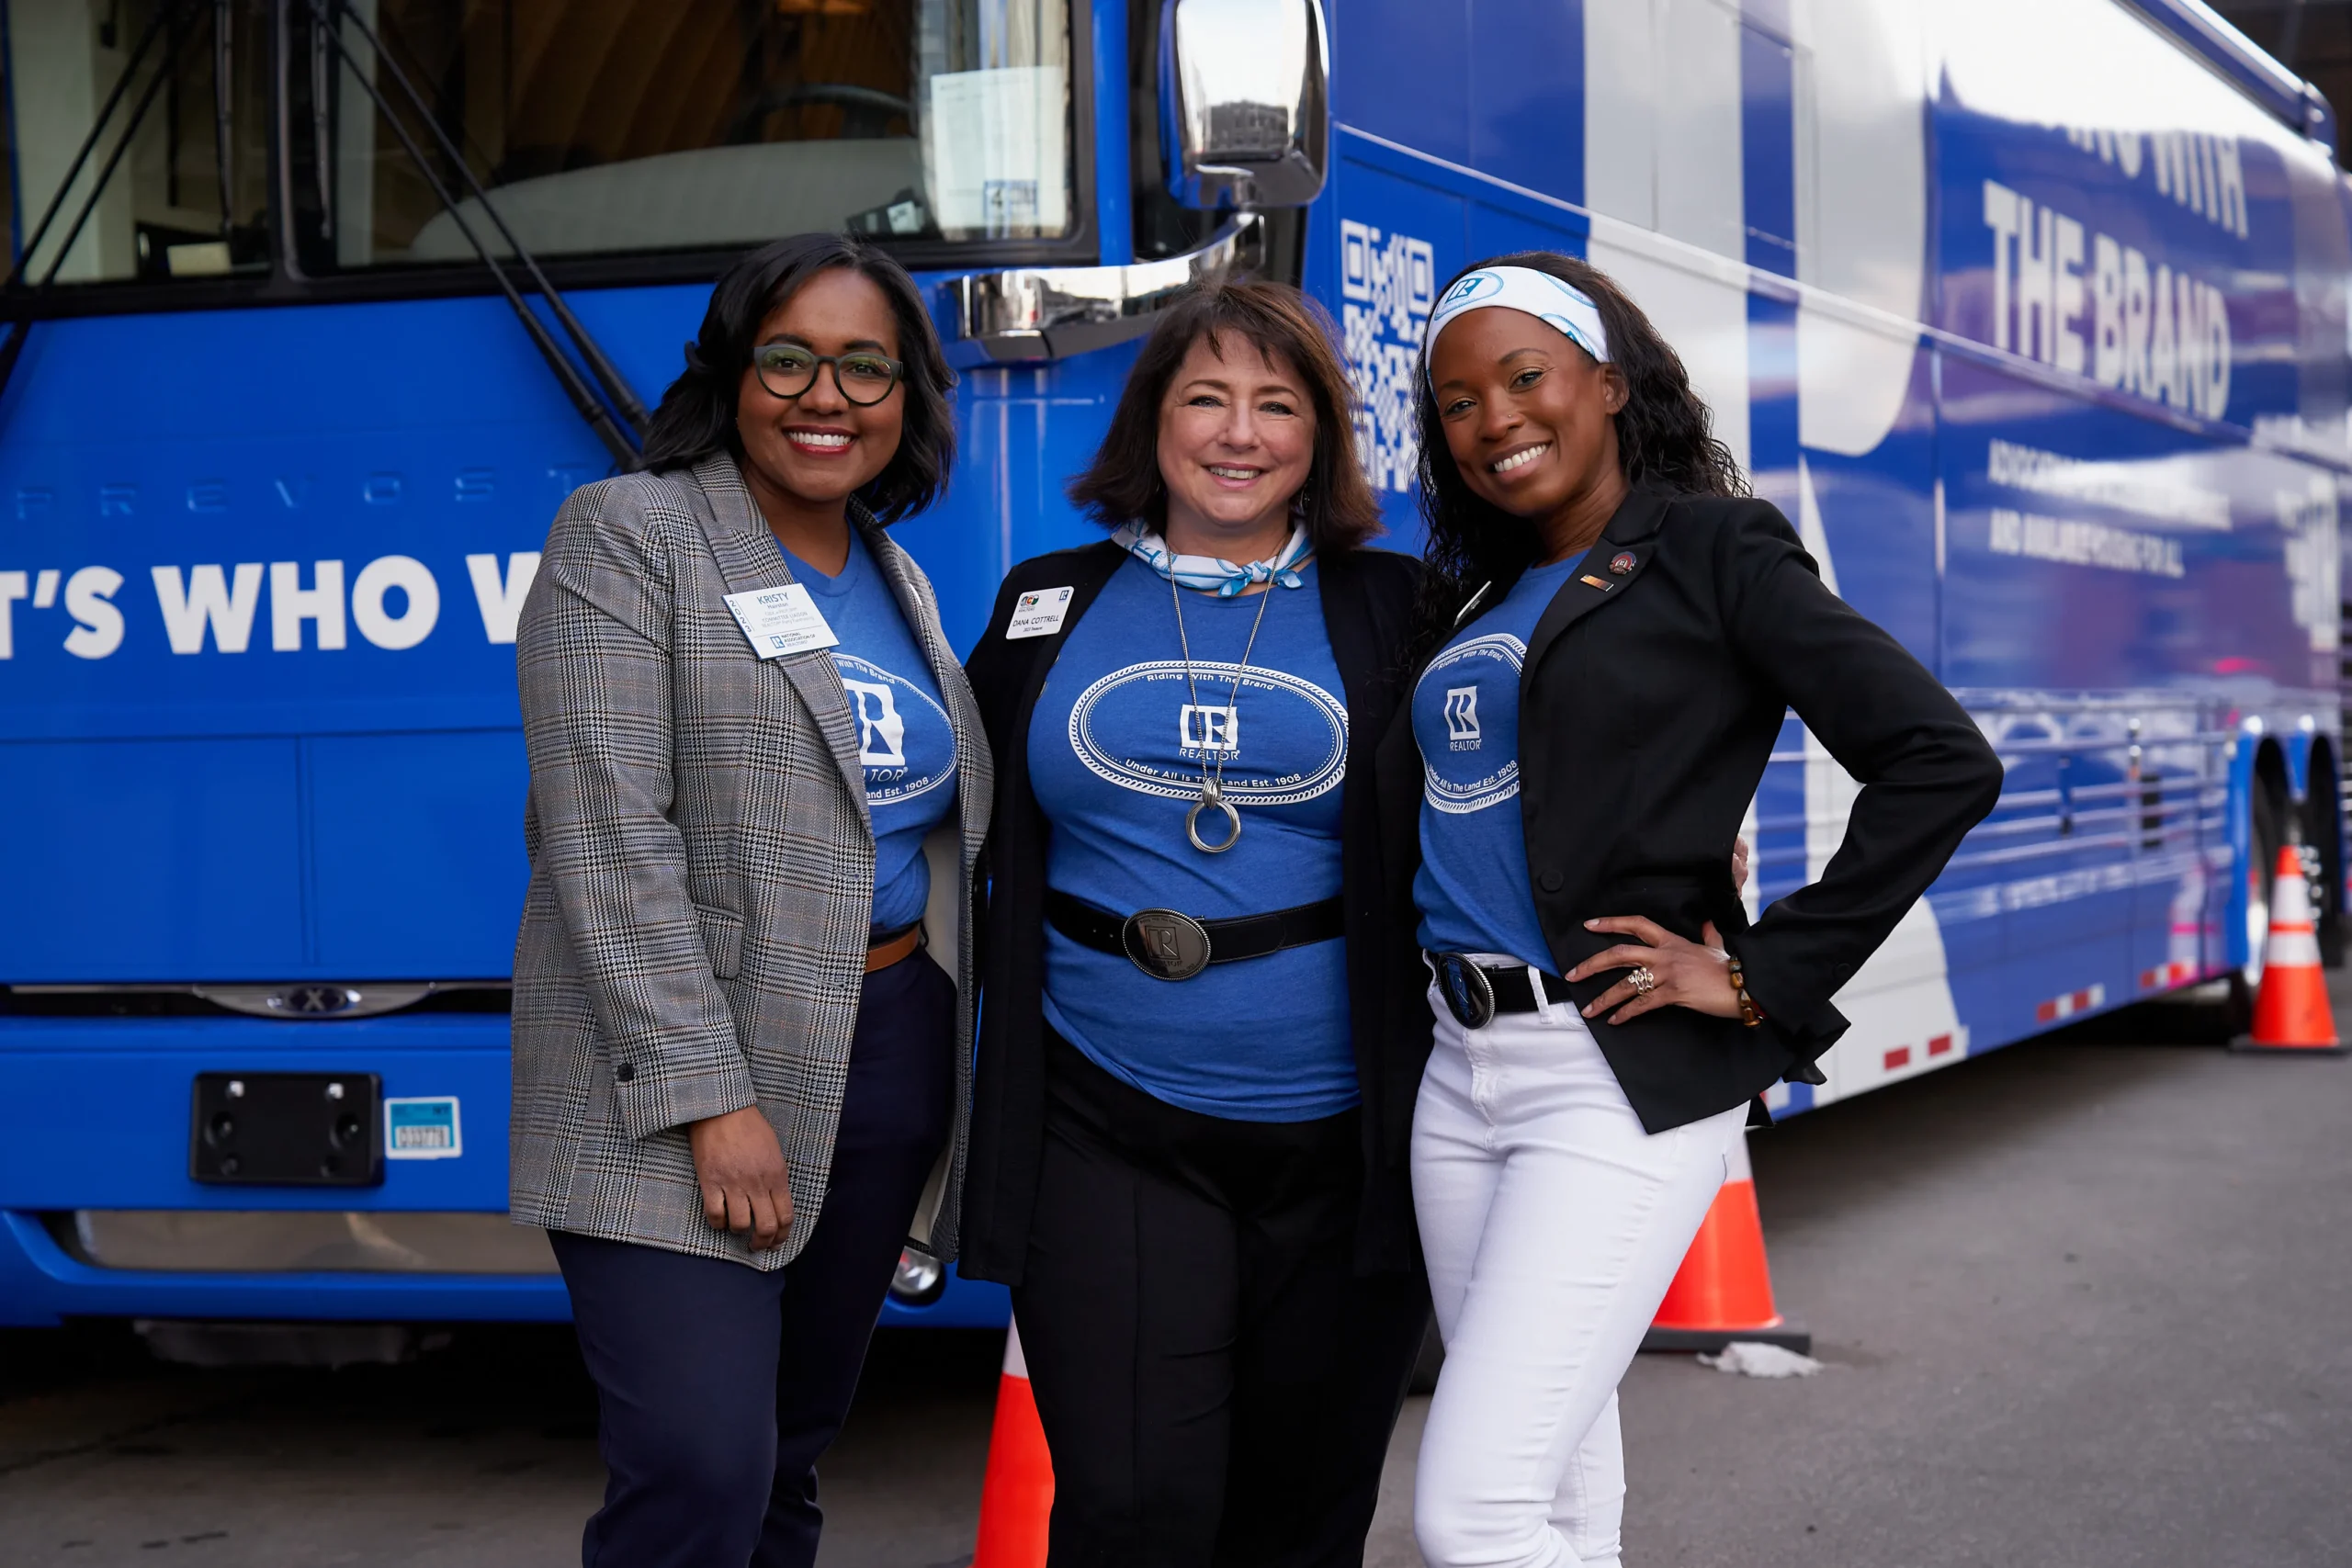 Three women posing in front of a BMG designed truck for the National Association of REALTORS®